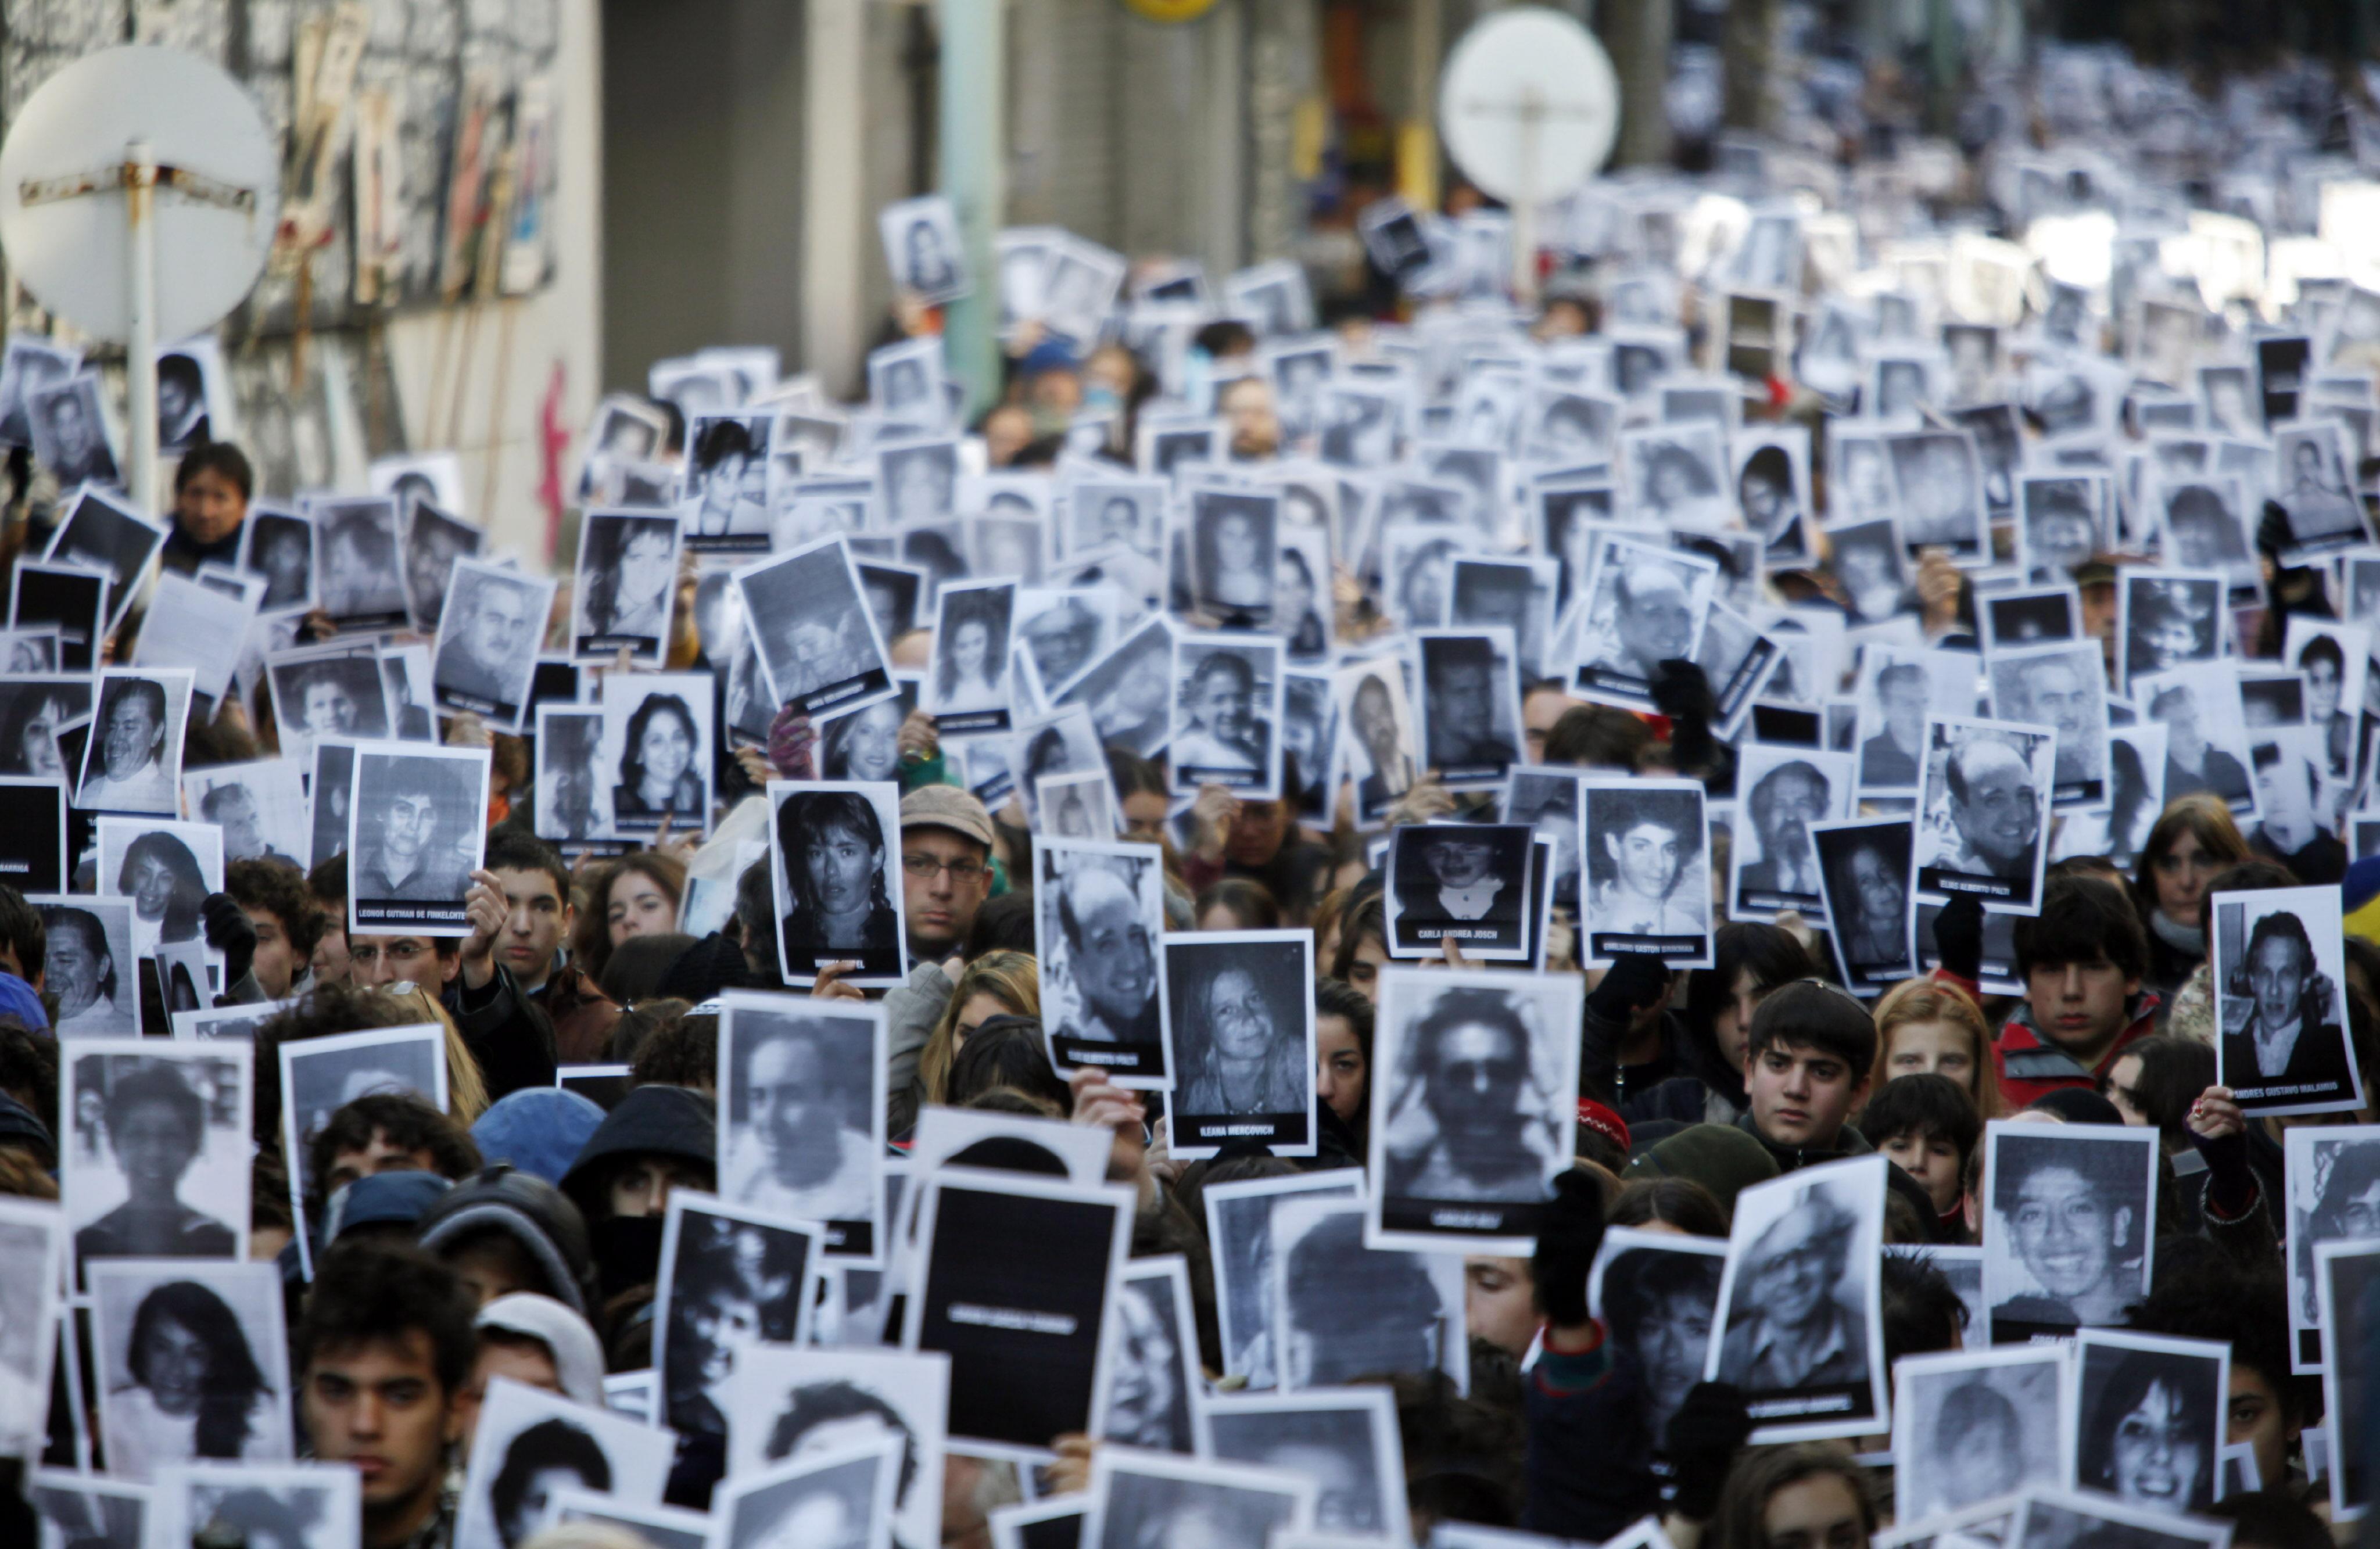 People holding photographs of the victims of the 1994 AMIA bombing participate at the ceremony to mark the 16th anniversary of this henious act that killed 85 people in Buenos Aires